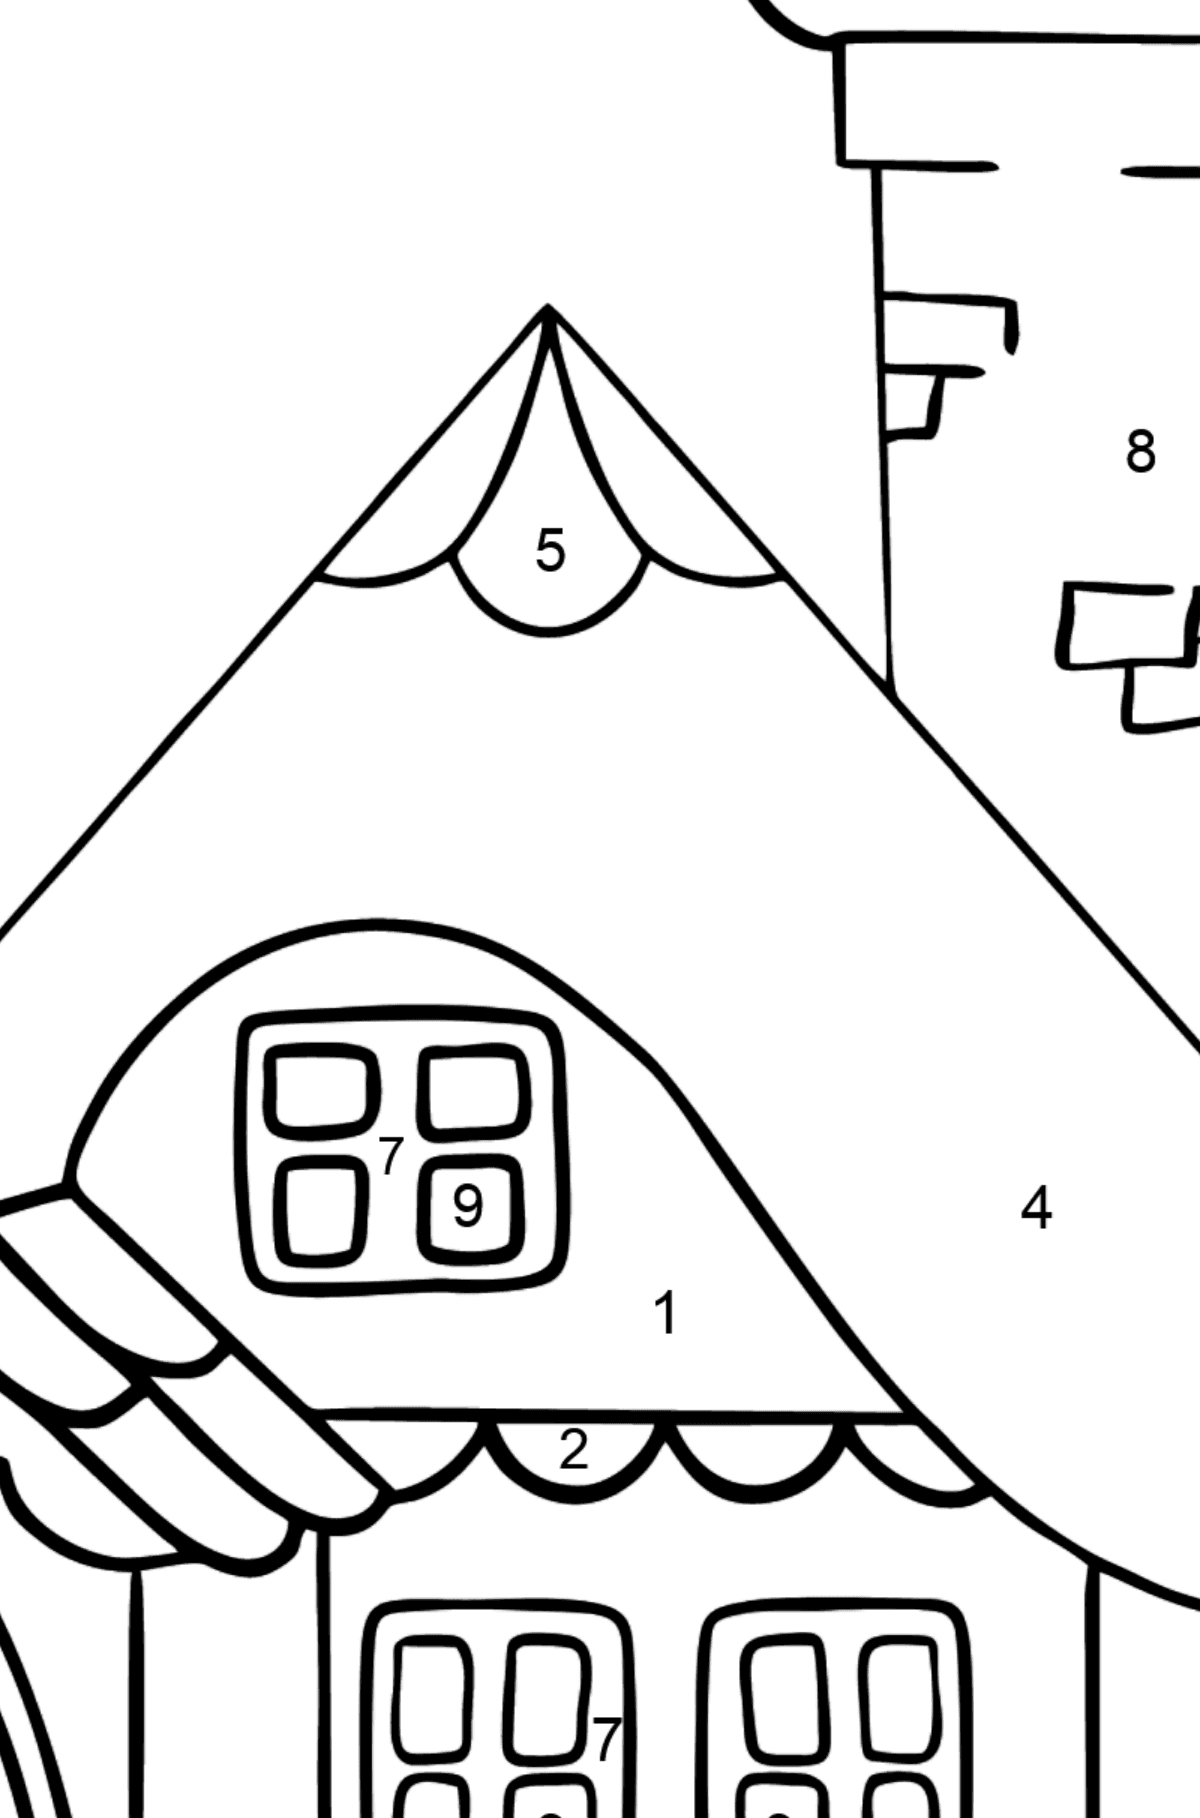 Coloring Page - A Wonderful House - Coloring by Numbers for Kids